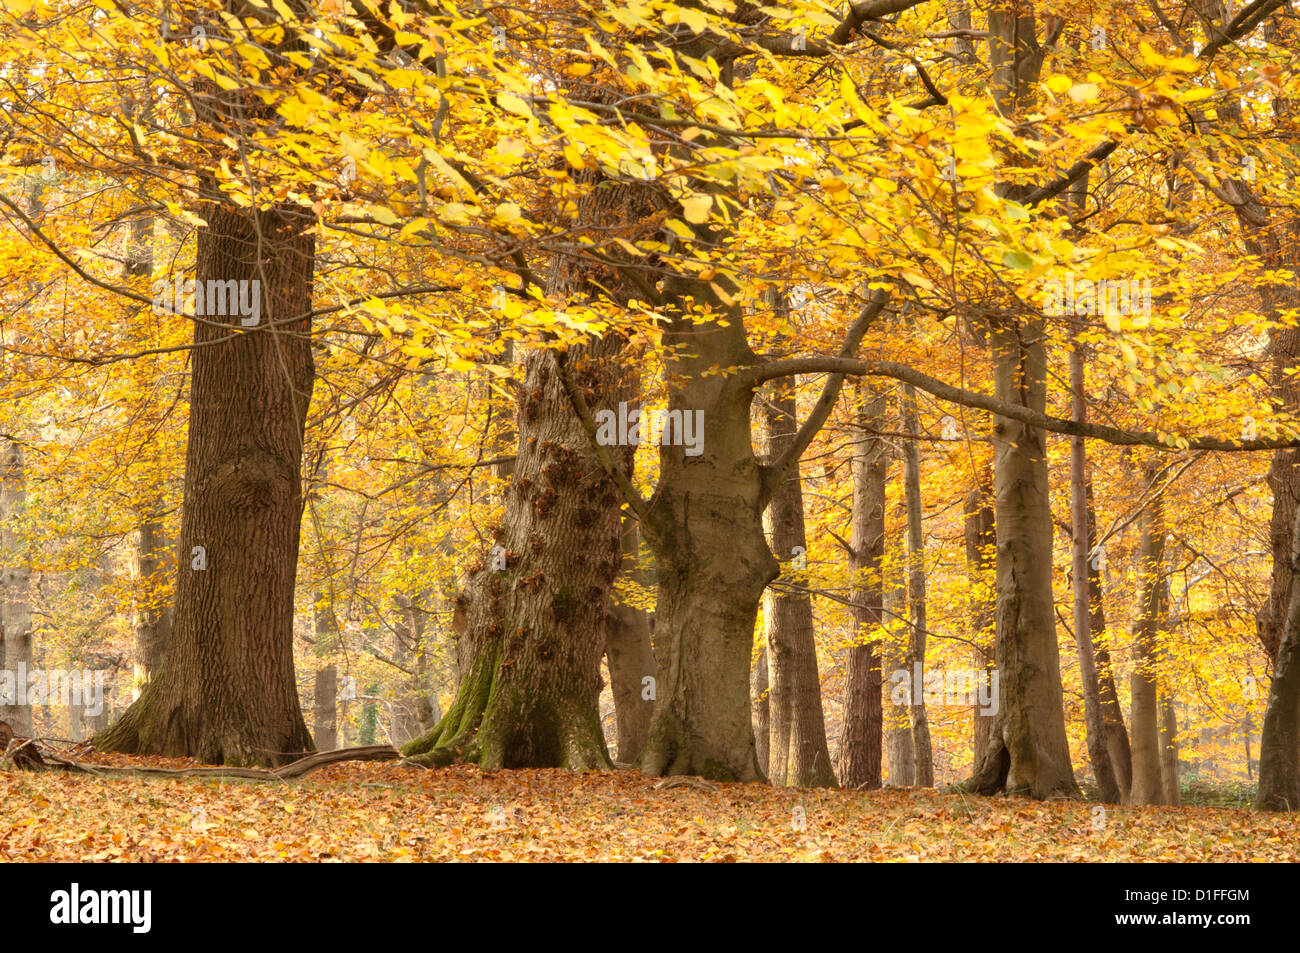 Mixed deciduous trees, Common beech, Sweet Chestnut, Oak, with autumn leaves. West Sussex, England, UK. November. Stock Photo